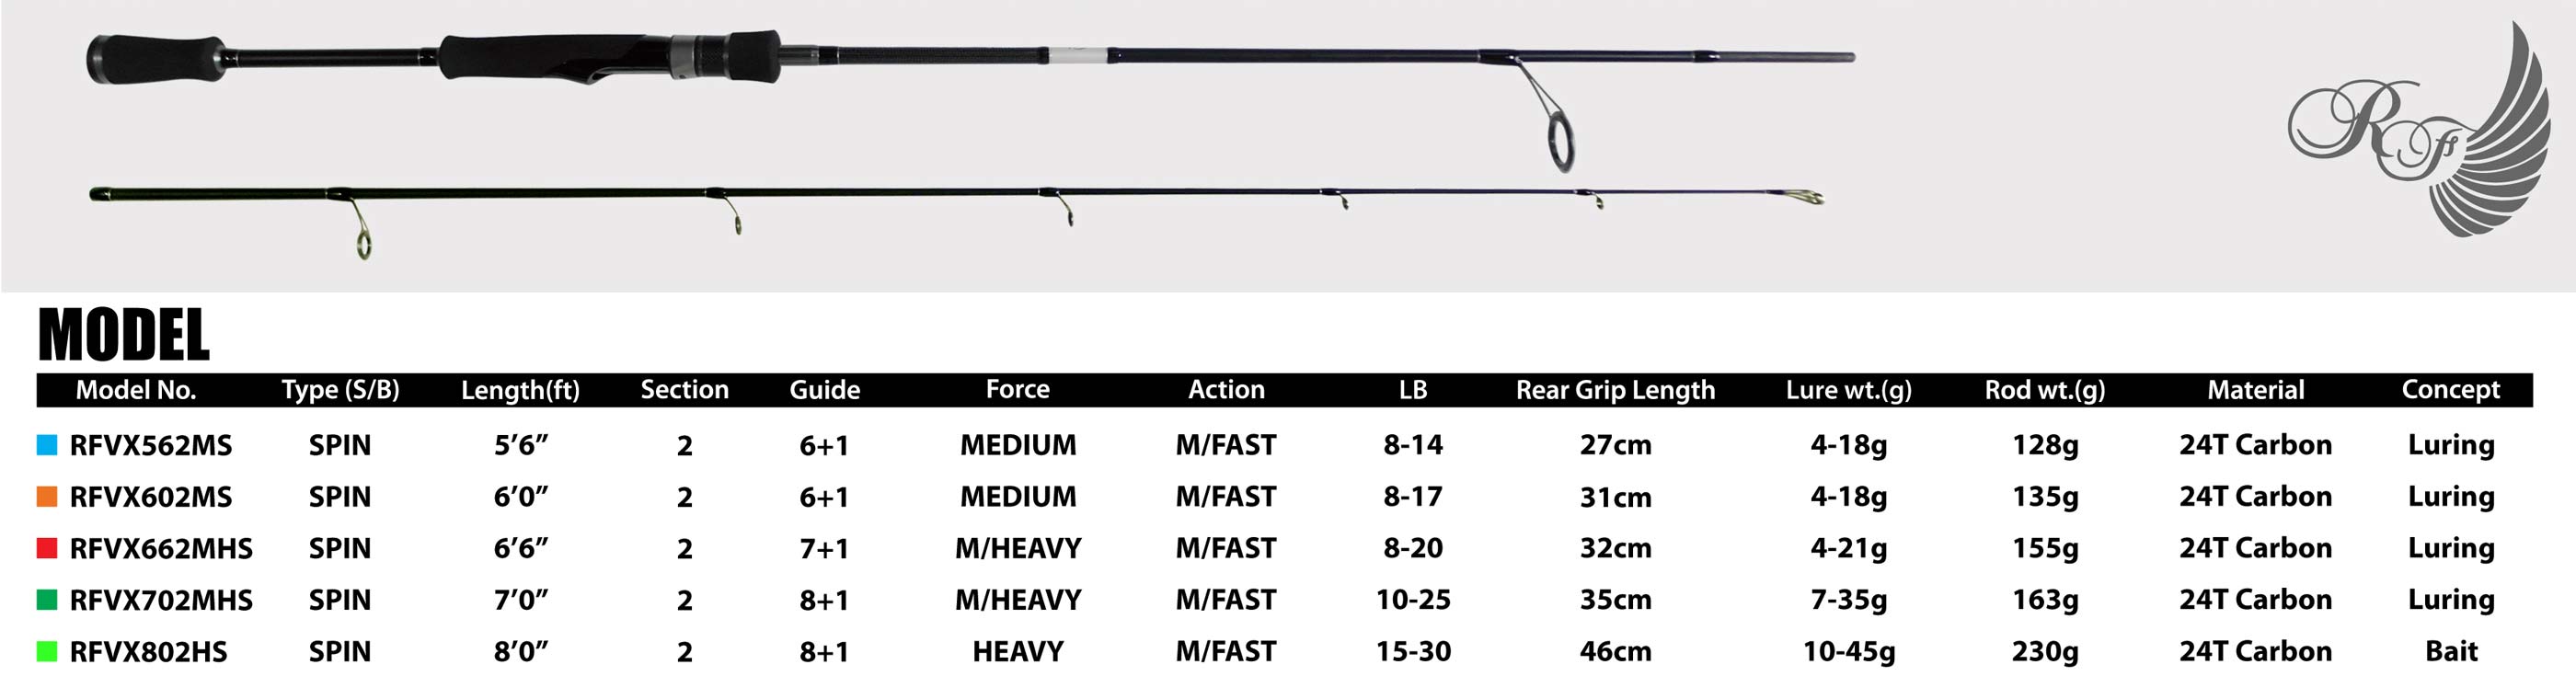 fishing rods, Rod Ford, Rod Ford fishing, MGFA, Venom, Venom Extreme, Rod Ford Venom Extreme, rods, rod, fishing Malaysia, jigging rods, casting rods, bottom fishing rods, MGFA fishing rods, Rod For fishing rods,